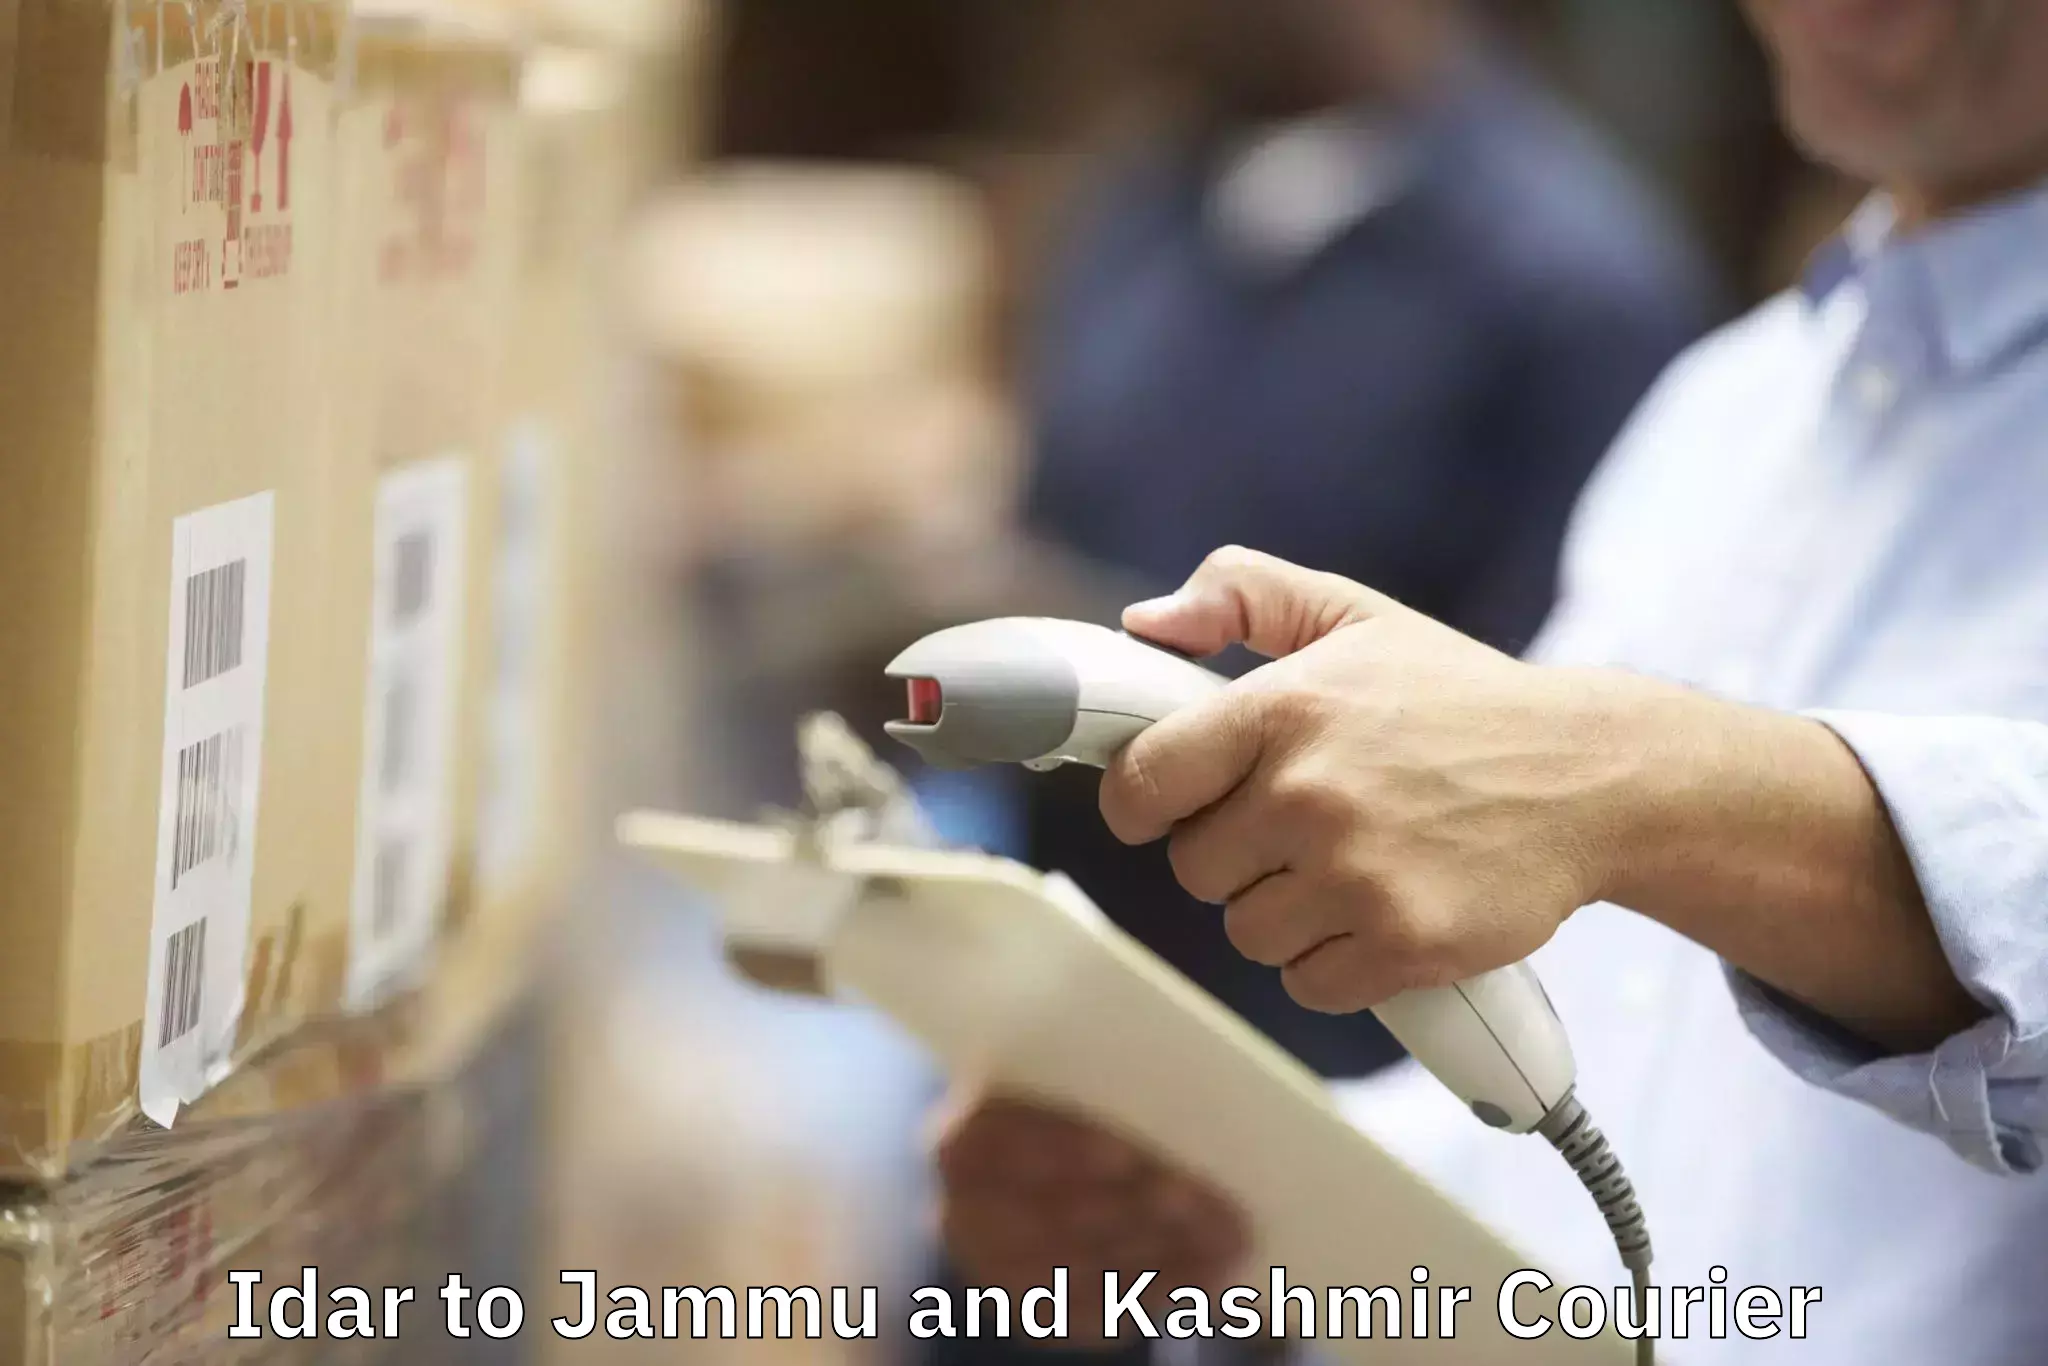 Professional movers and packers Idar to Jammu and Kashmir